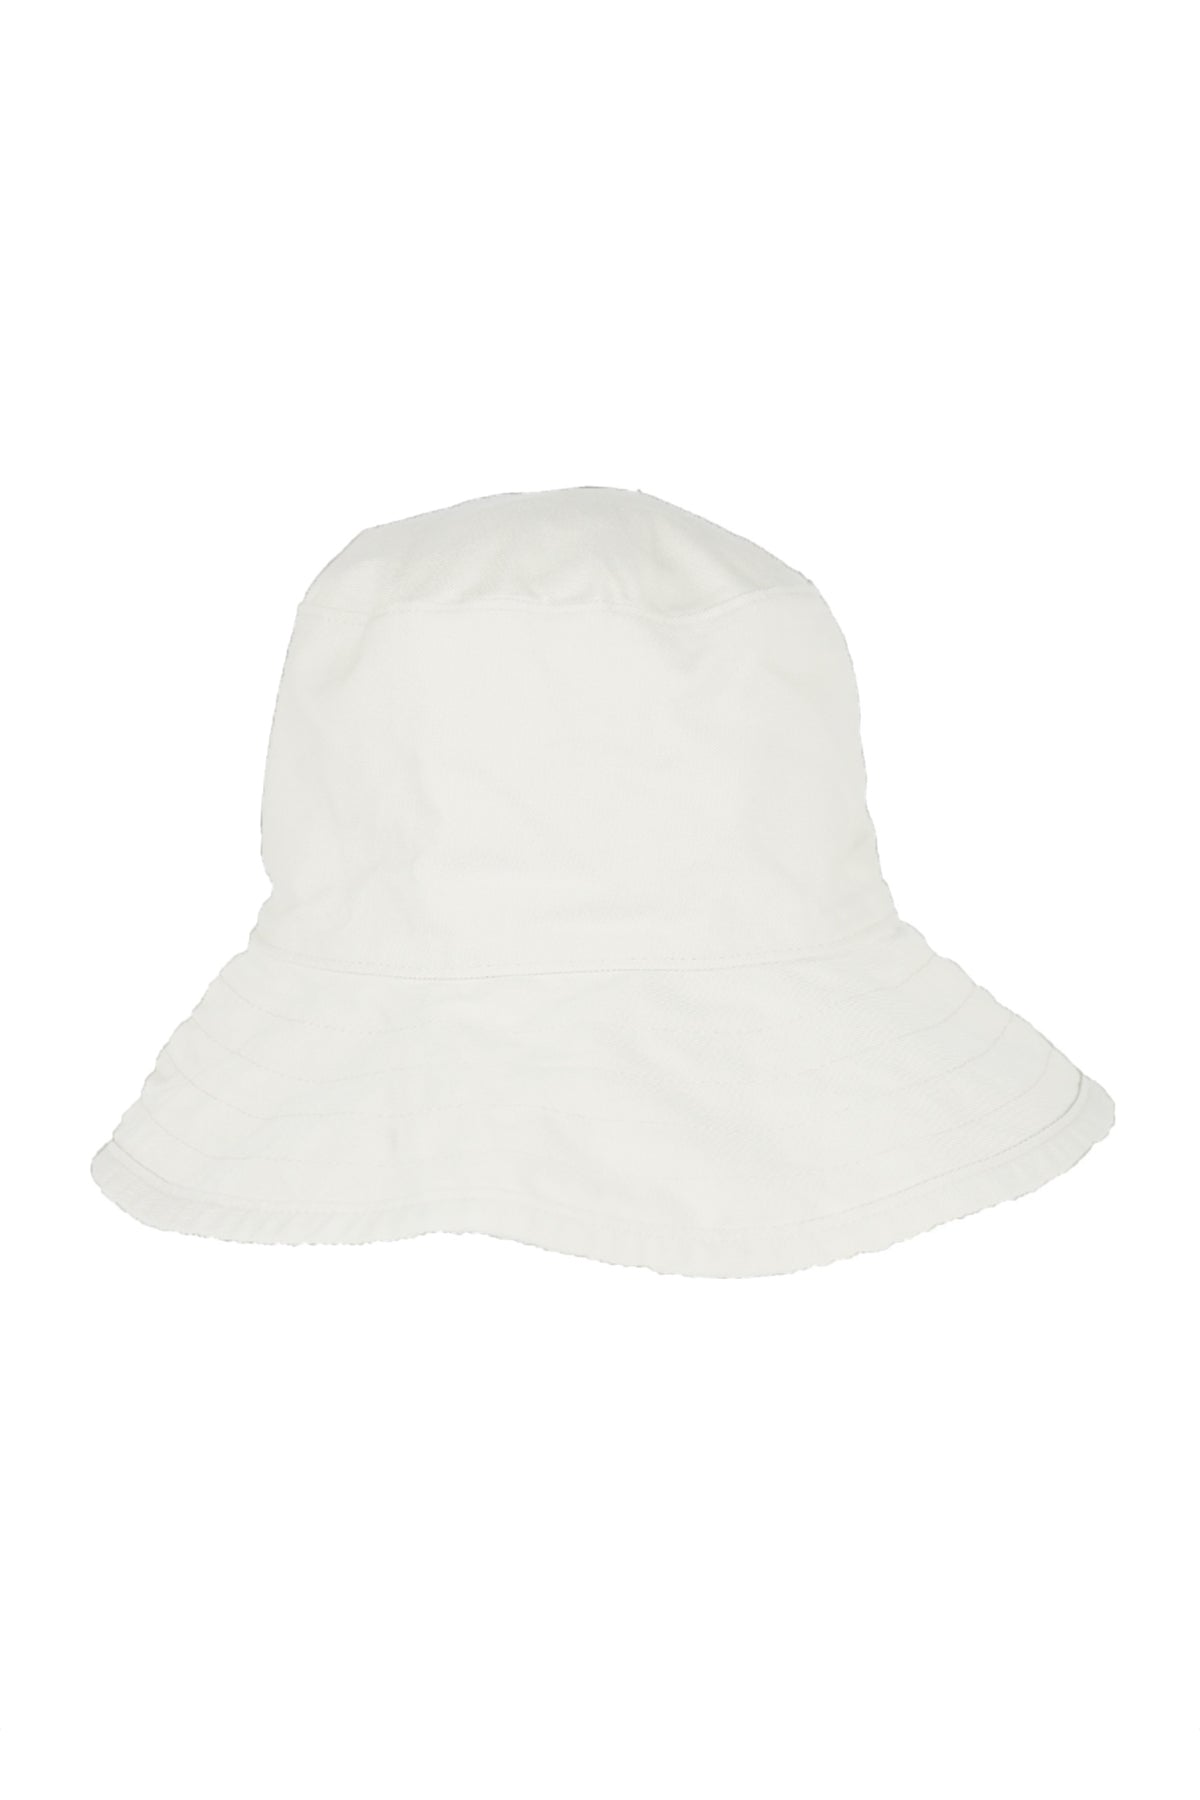 A Velvet by Graham & Spencer Washed Cotton Crusher Hat on a white background.-26166718726337